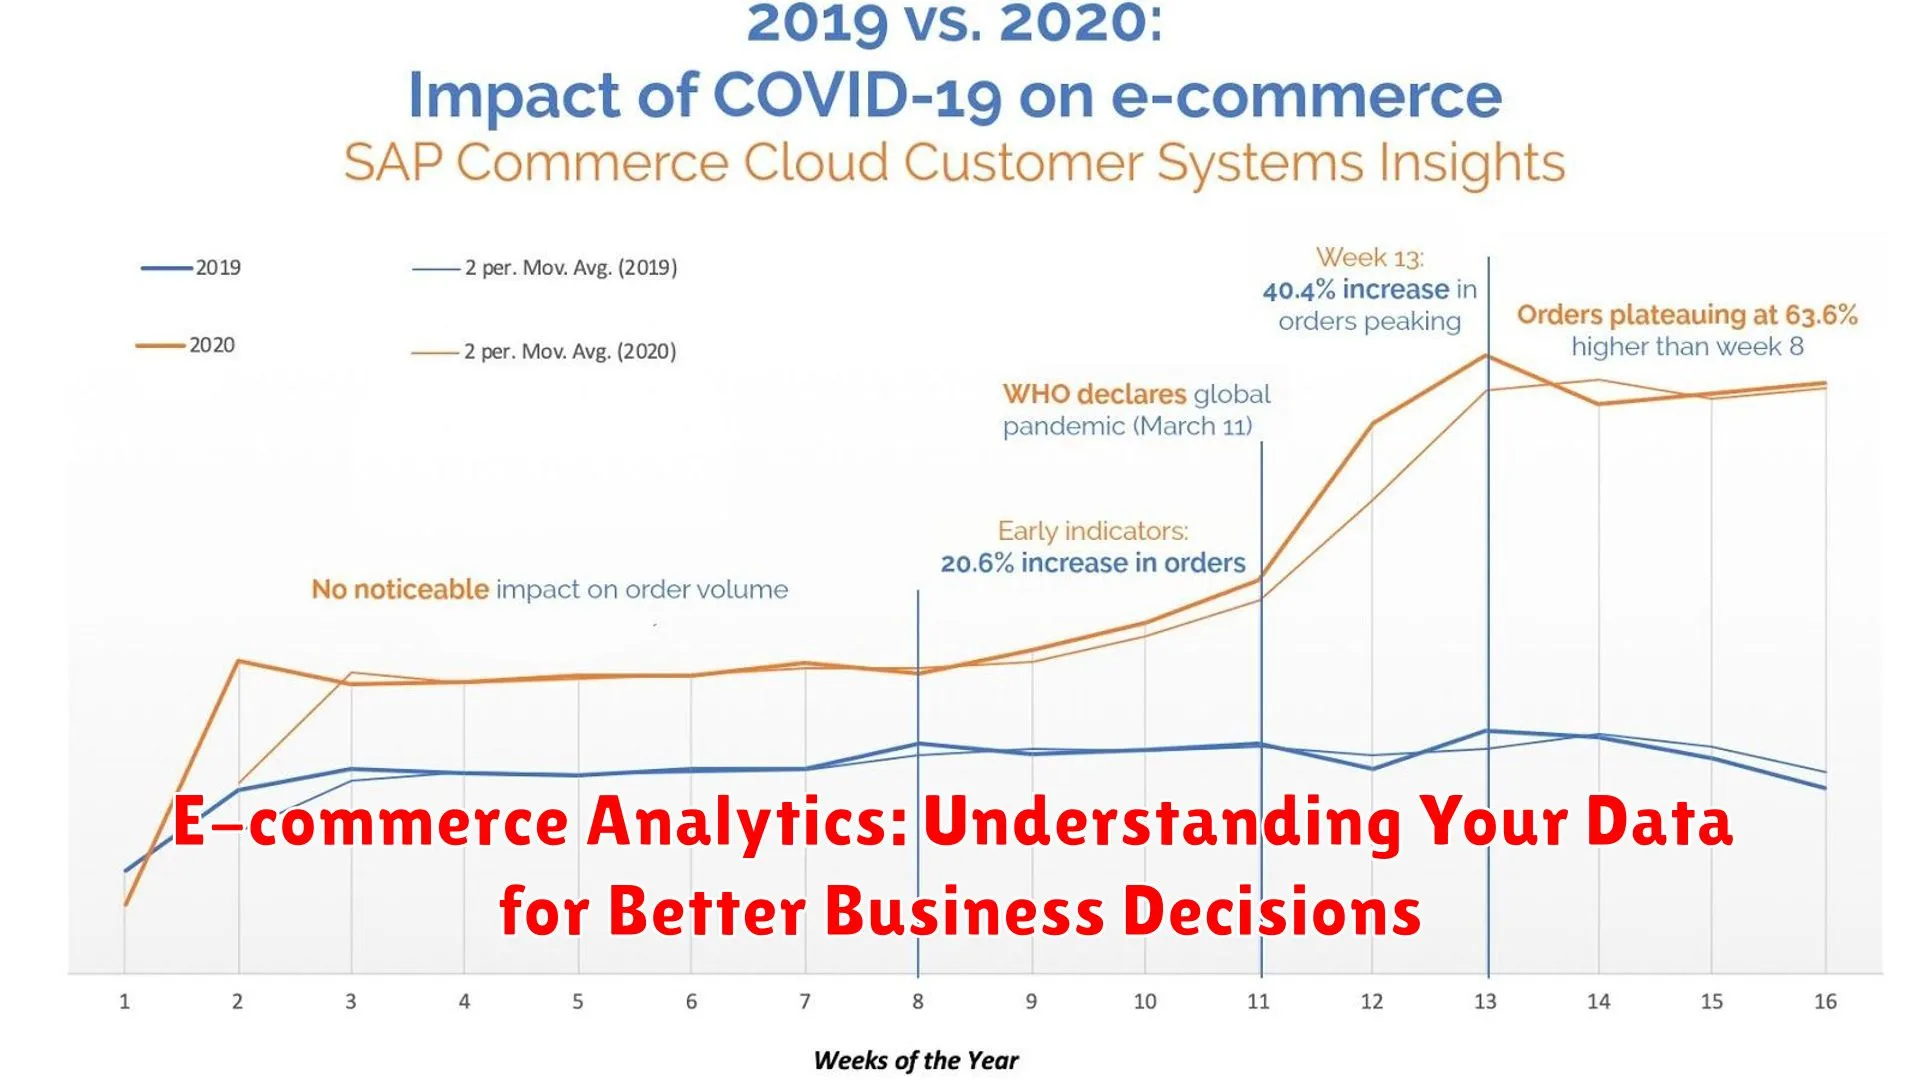 E-commerce Analytics: Understanding Your Data for Better Business Decisions